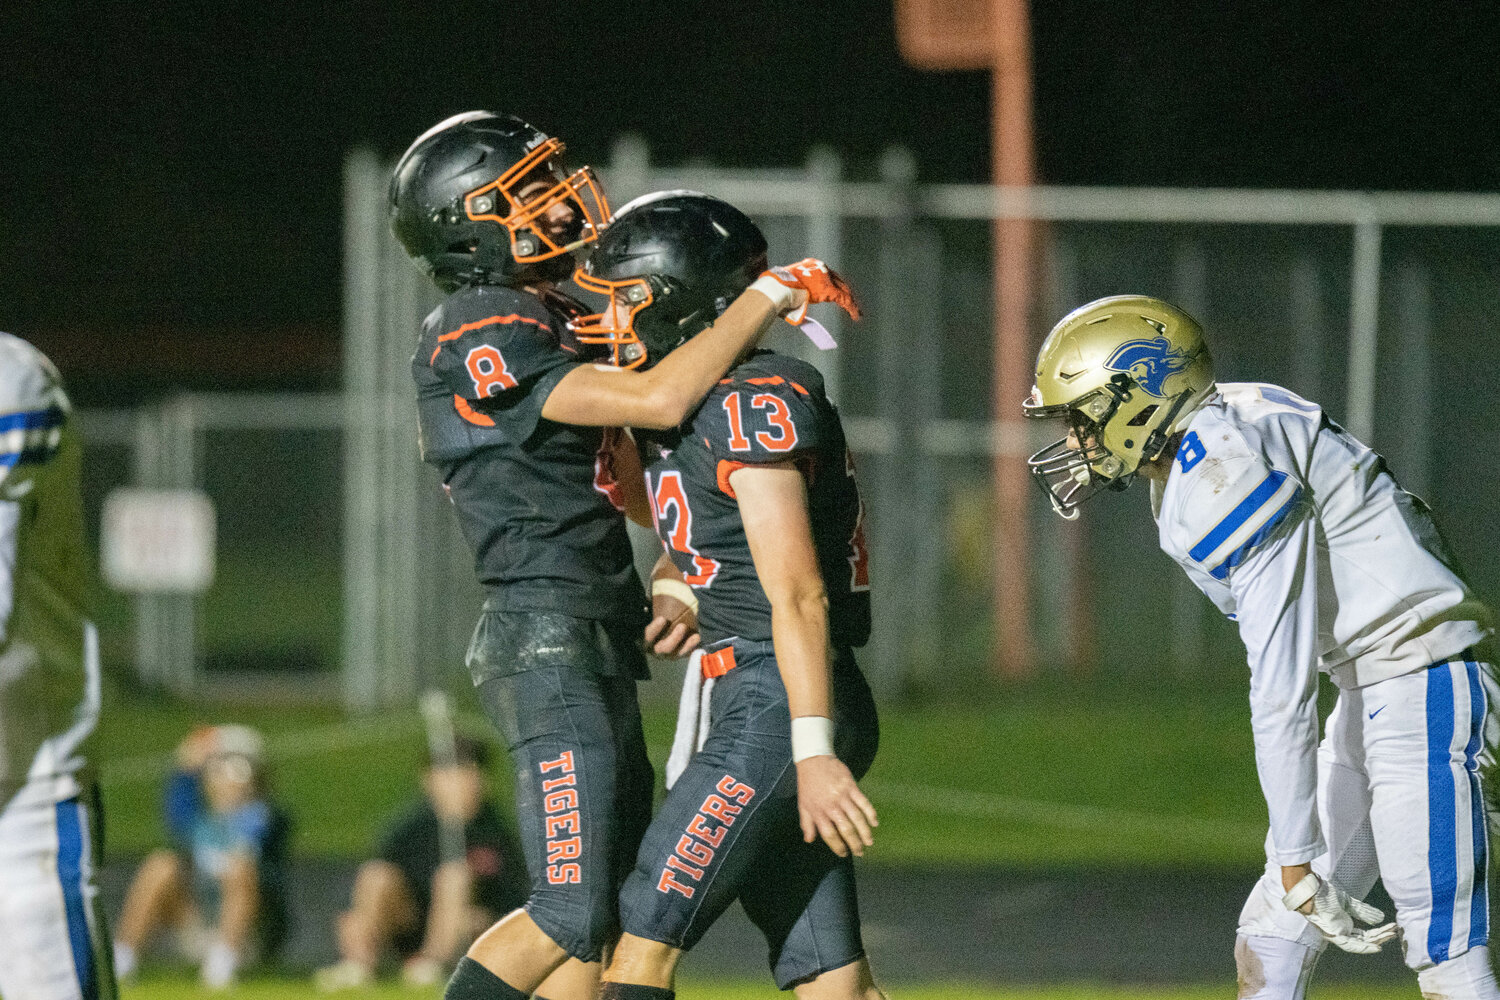 Conner Holmes (13) celebrates his touchdown with James Grose in the first half of Napavine's crossover game against Adna on Nov. 4.